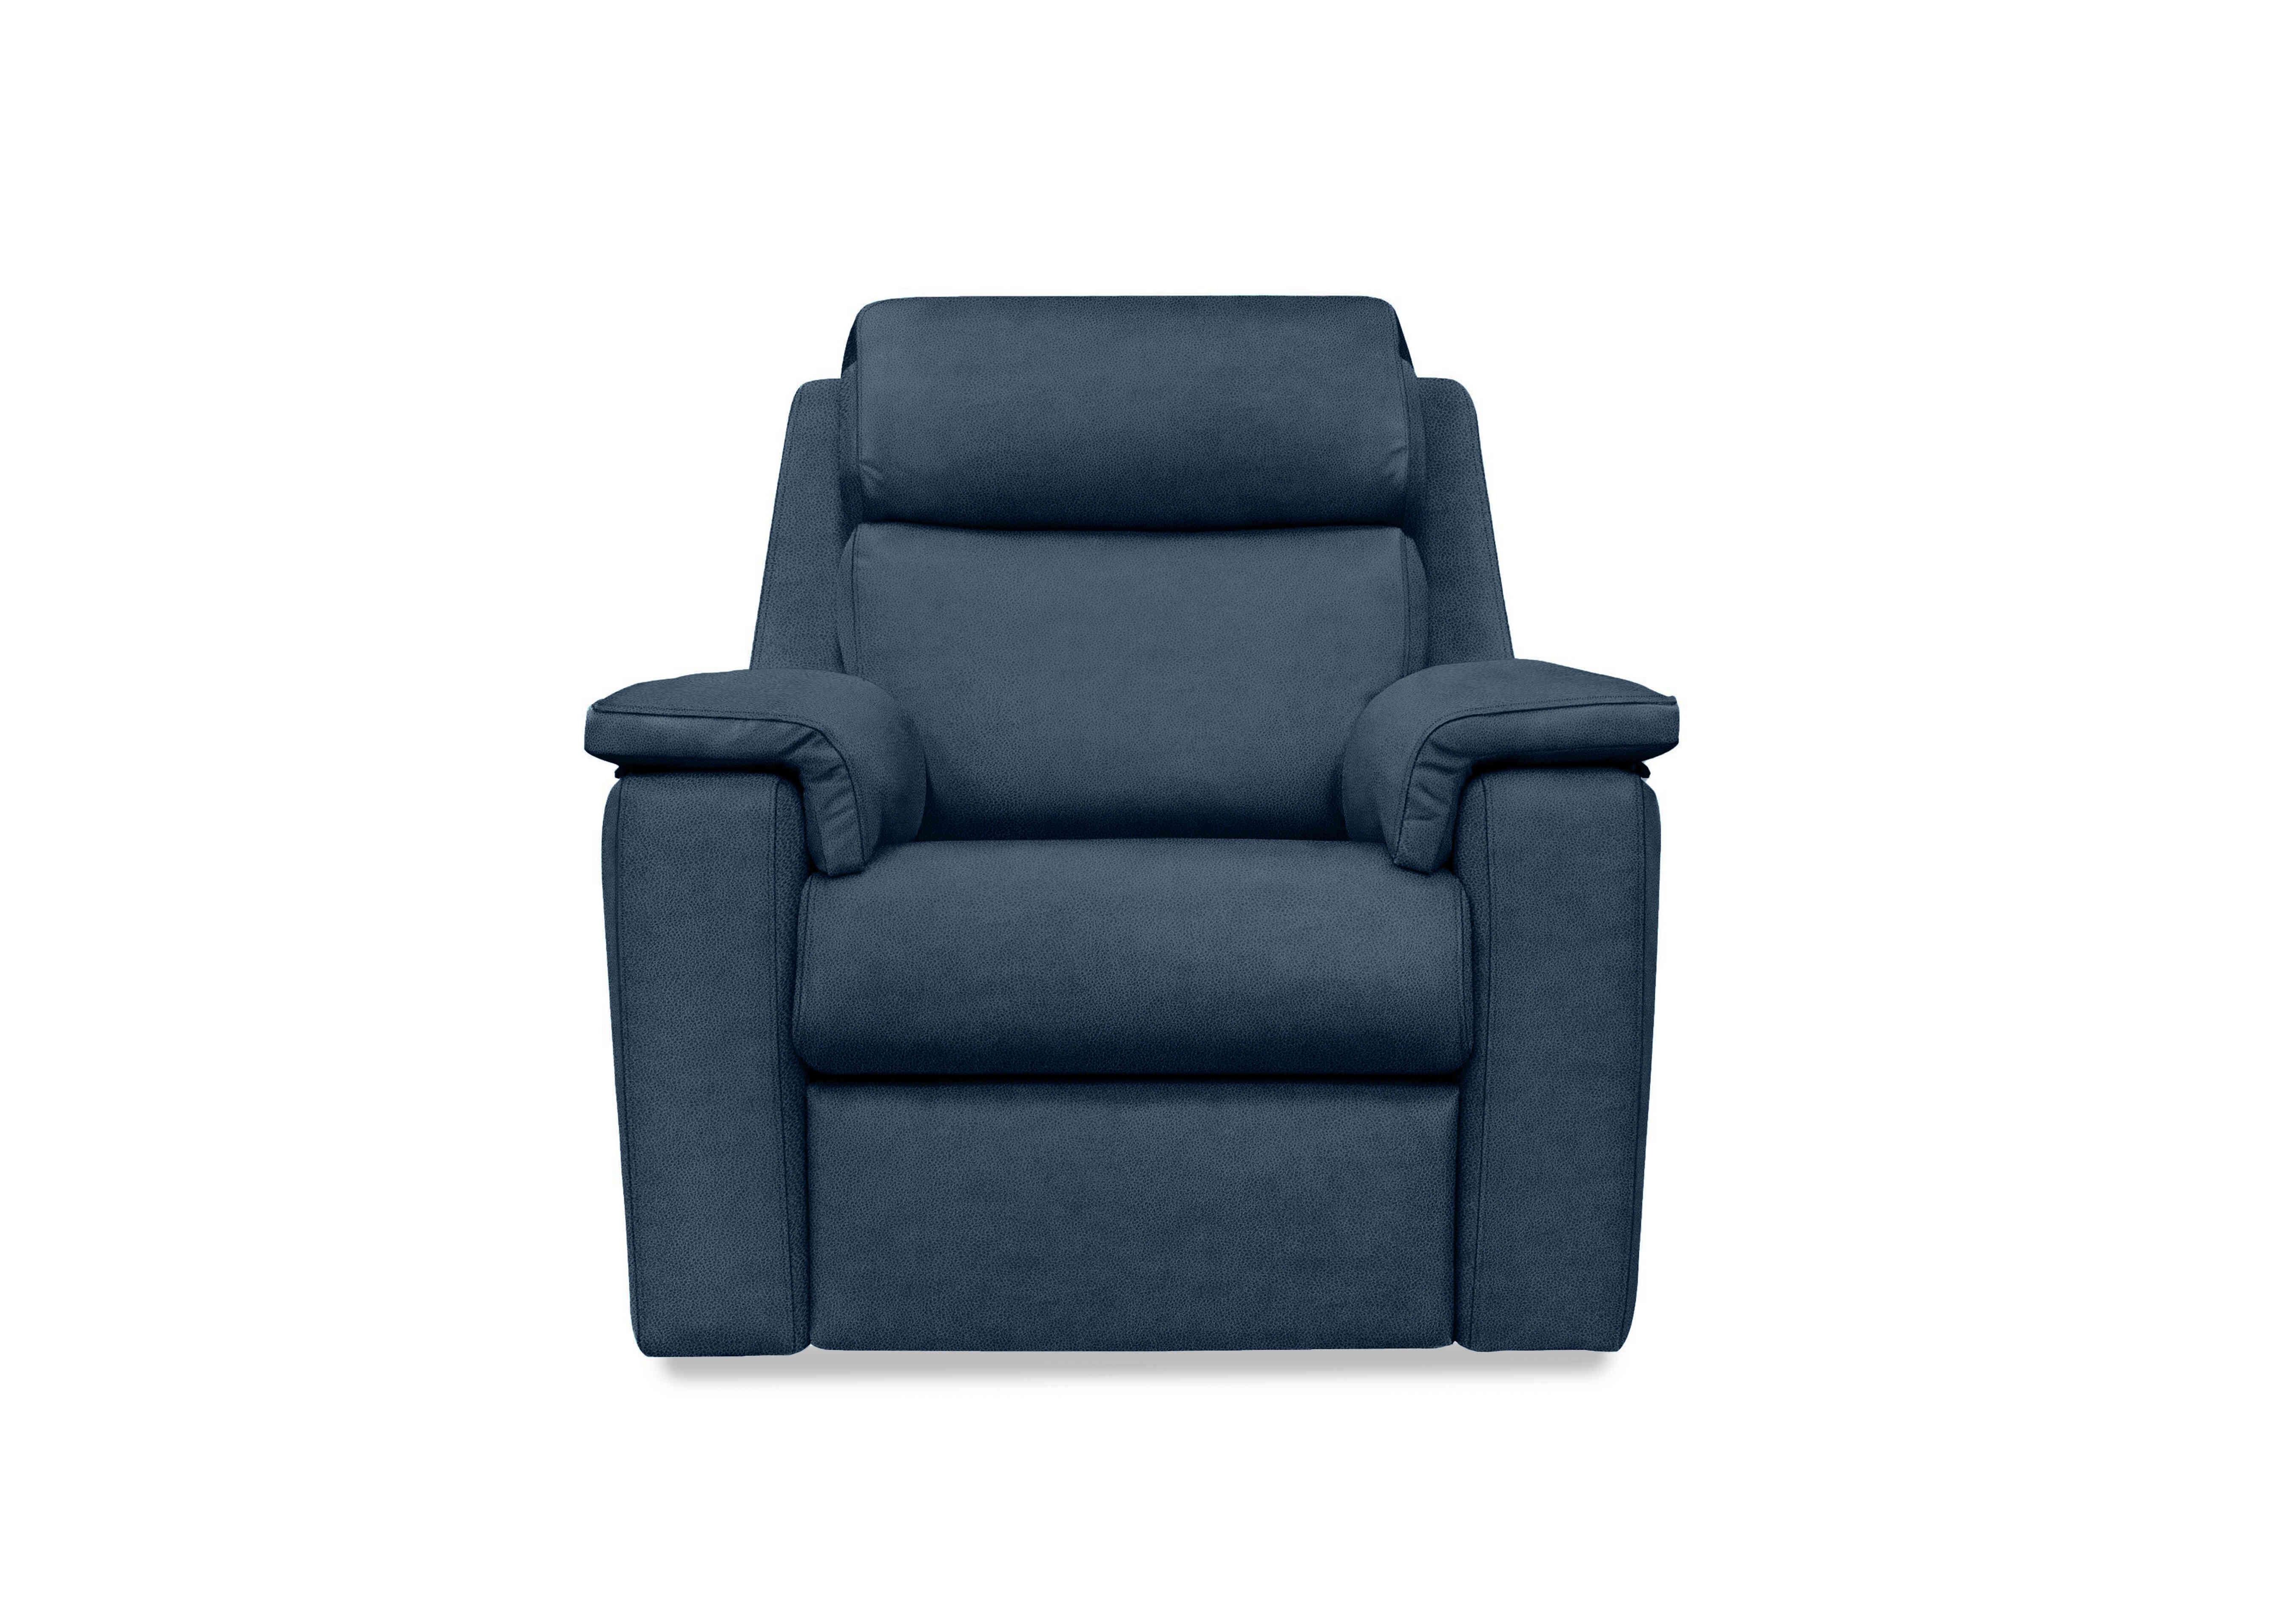 Thornbury Fabric Power Recliner Chair with Power Headrest and Power Lumbar in A125 Stingray Indigo on Furniture Village